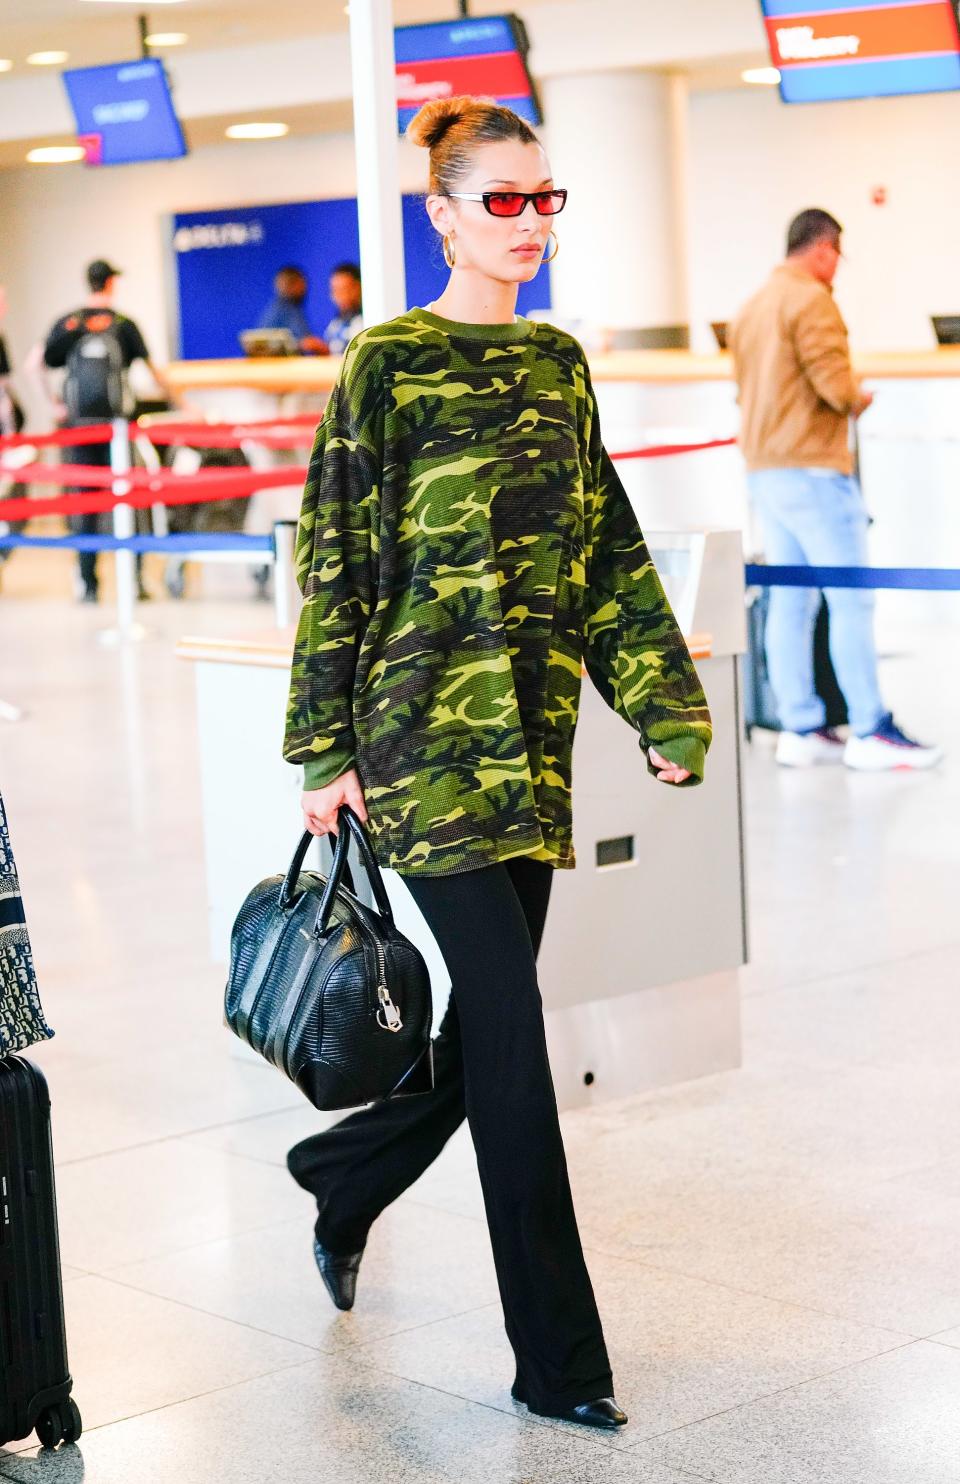 <h1 class="title">Bella Hadid At JFK Airport In New York Wearing Camo</h1><cite class="credit">Photo: Splash News</cite>